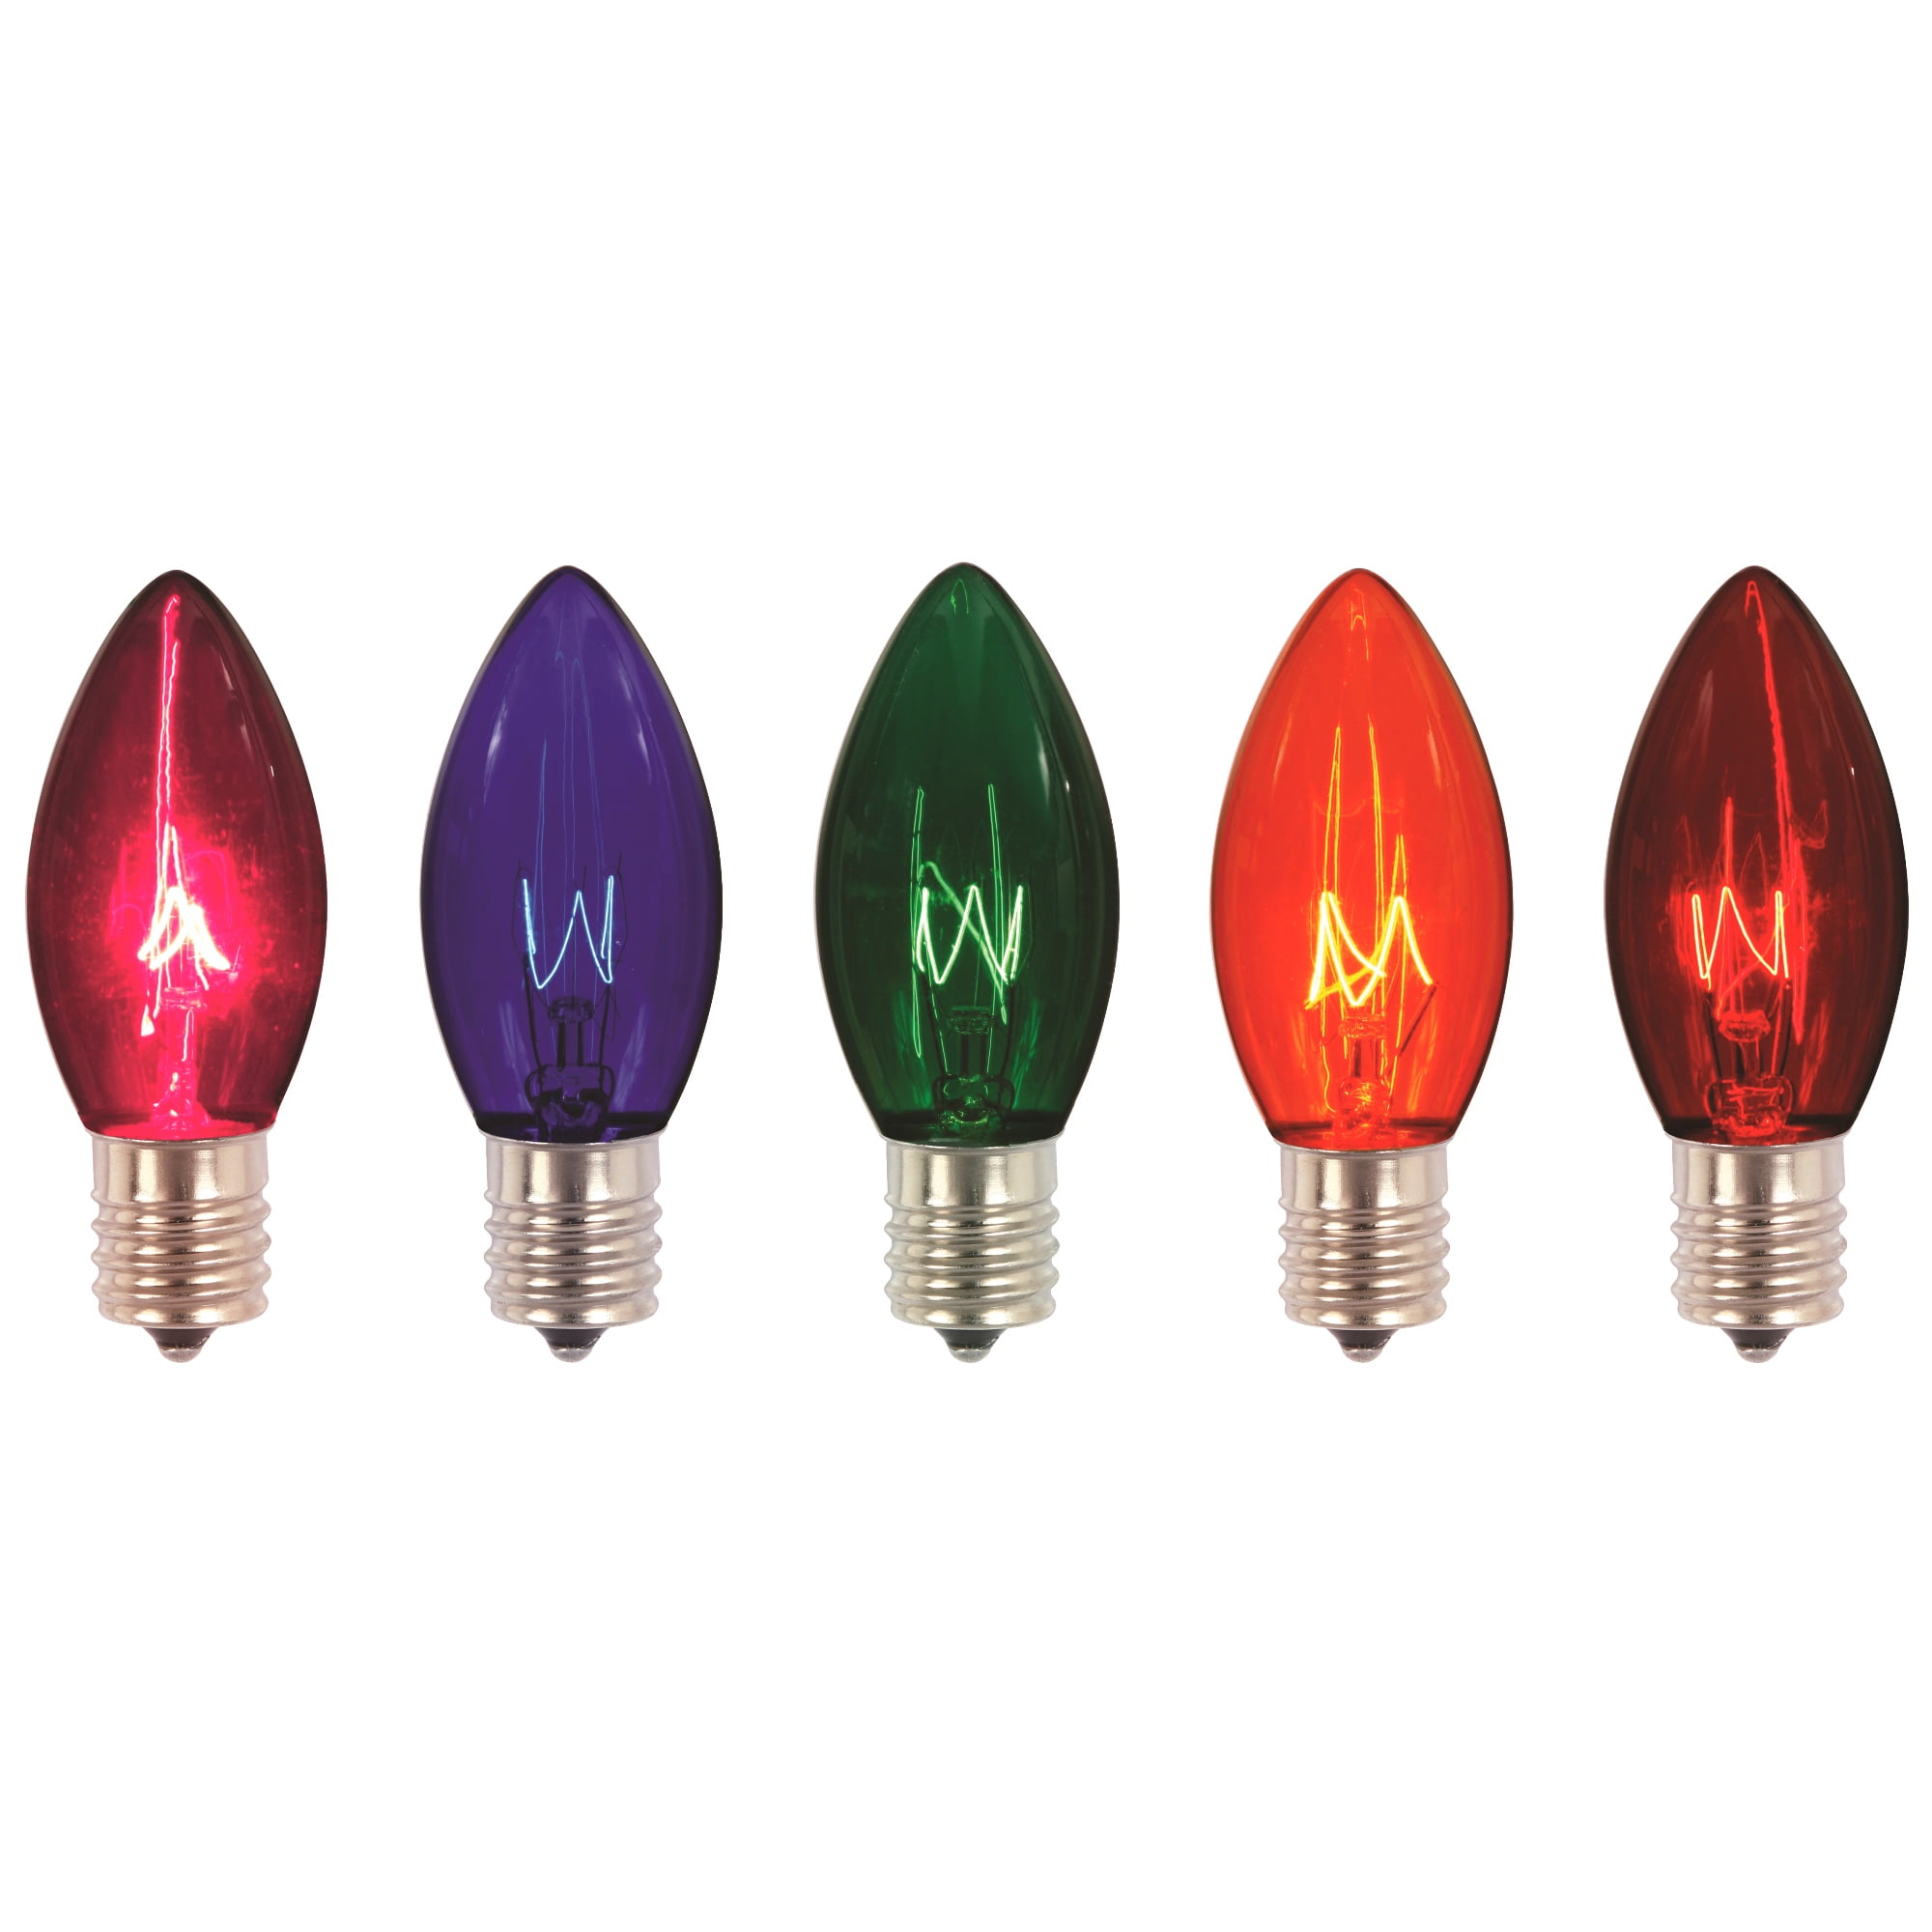 Lot 12 packs 1094W White Noma C-9 1/4 Outdoor Bulbs for Vintage Christmas lights 